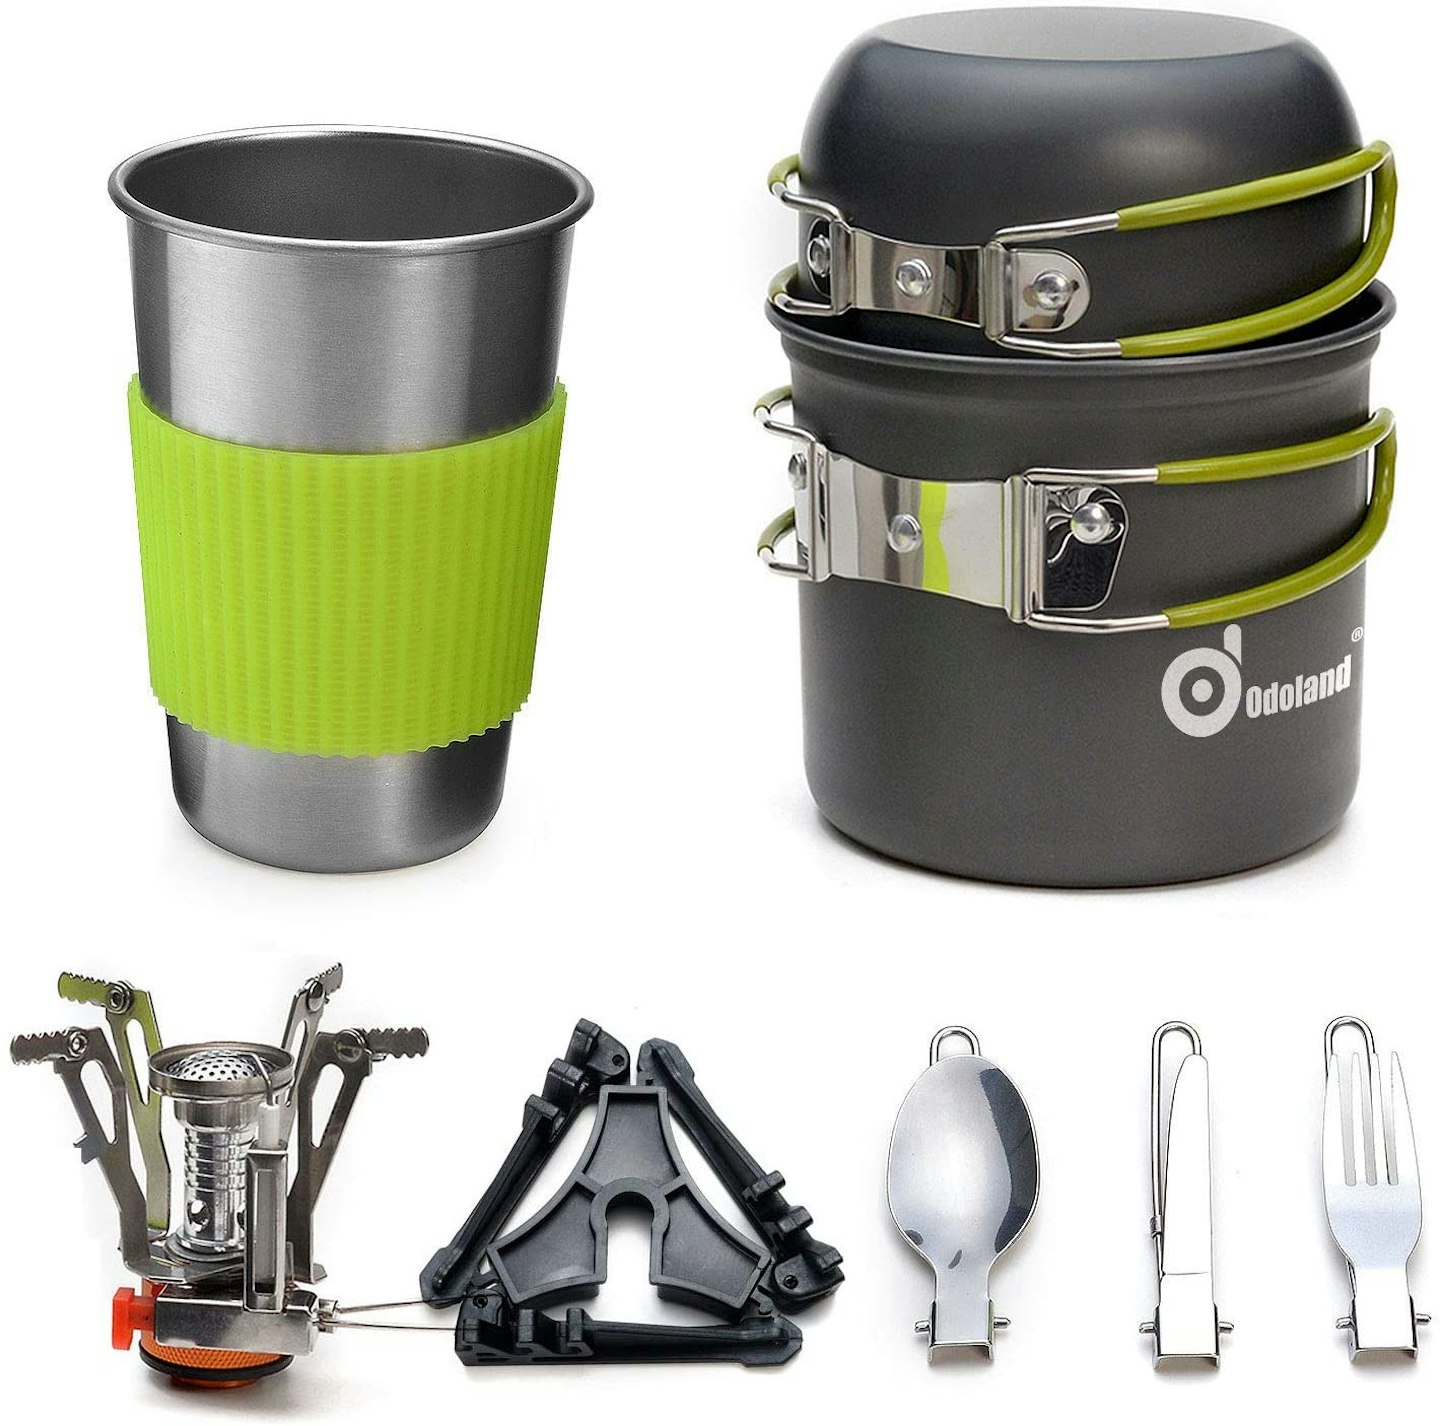 Odoland Camping Cookware Kit with Stove